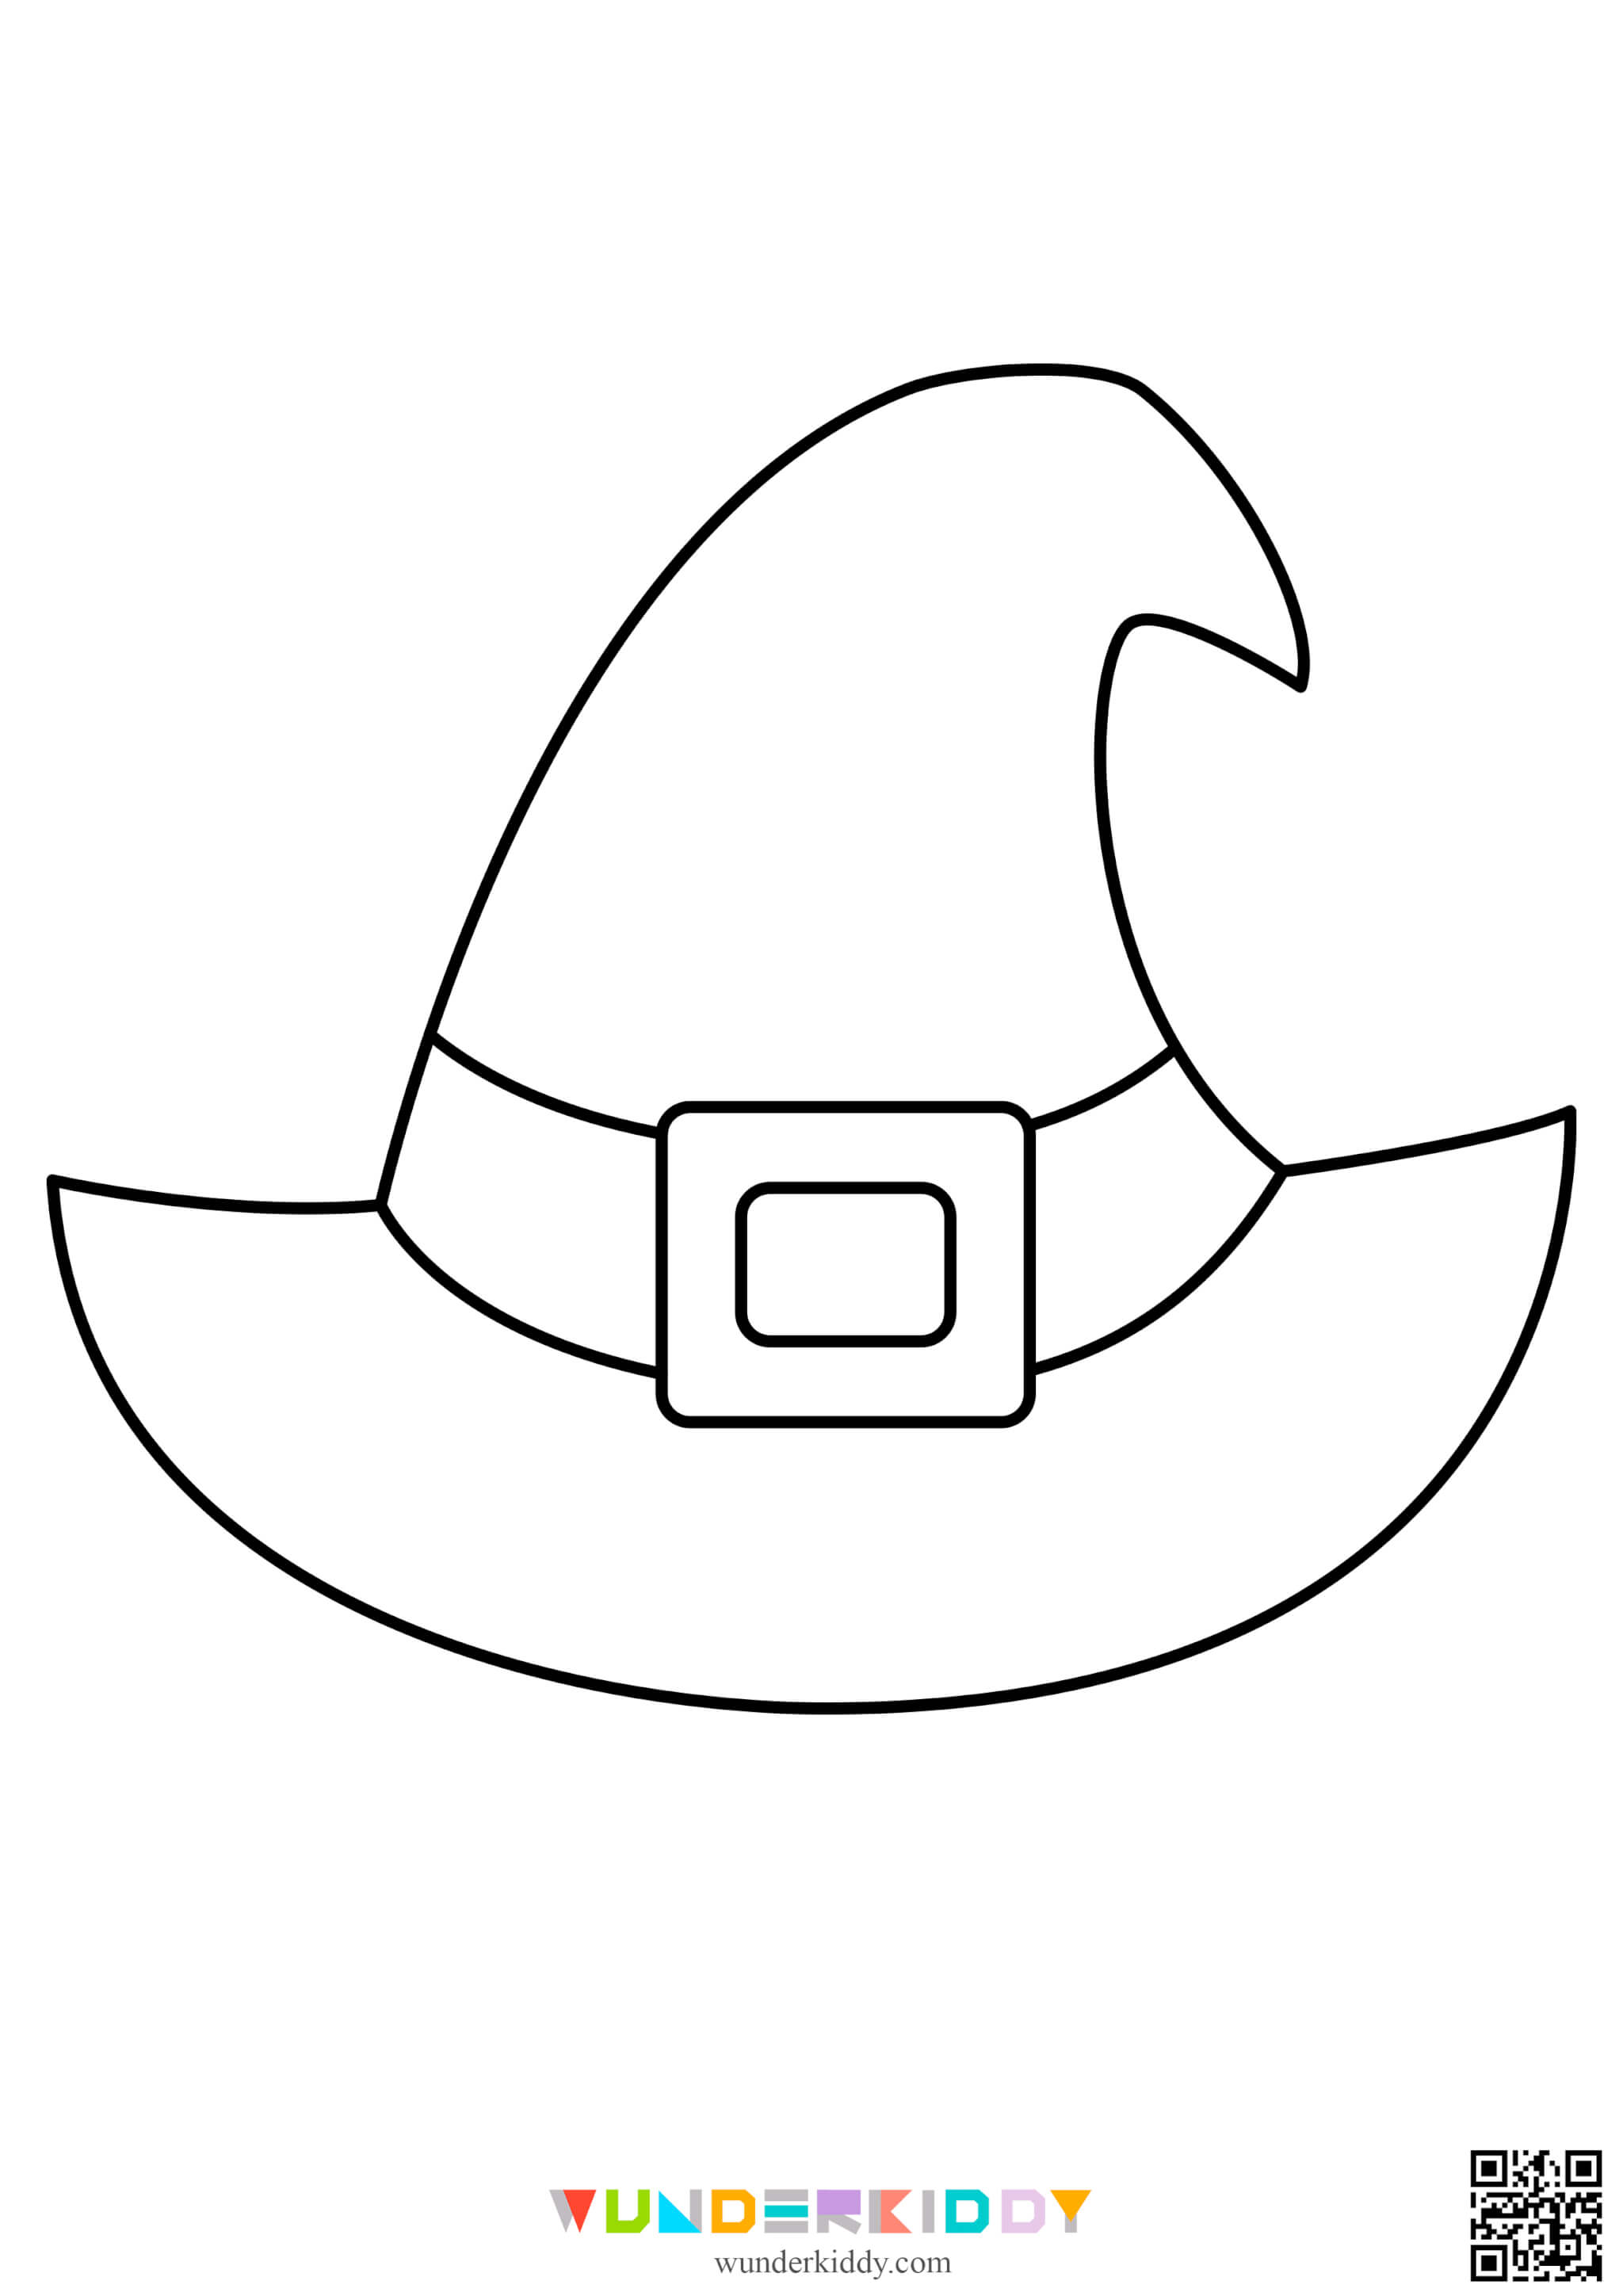 Halloween Coloring Pages - Image 6